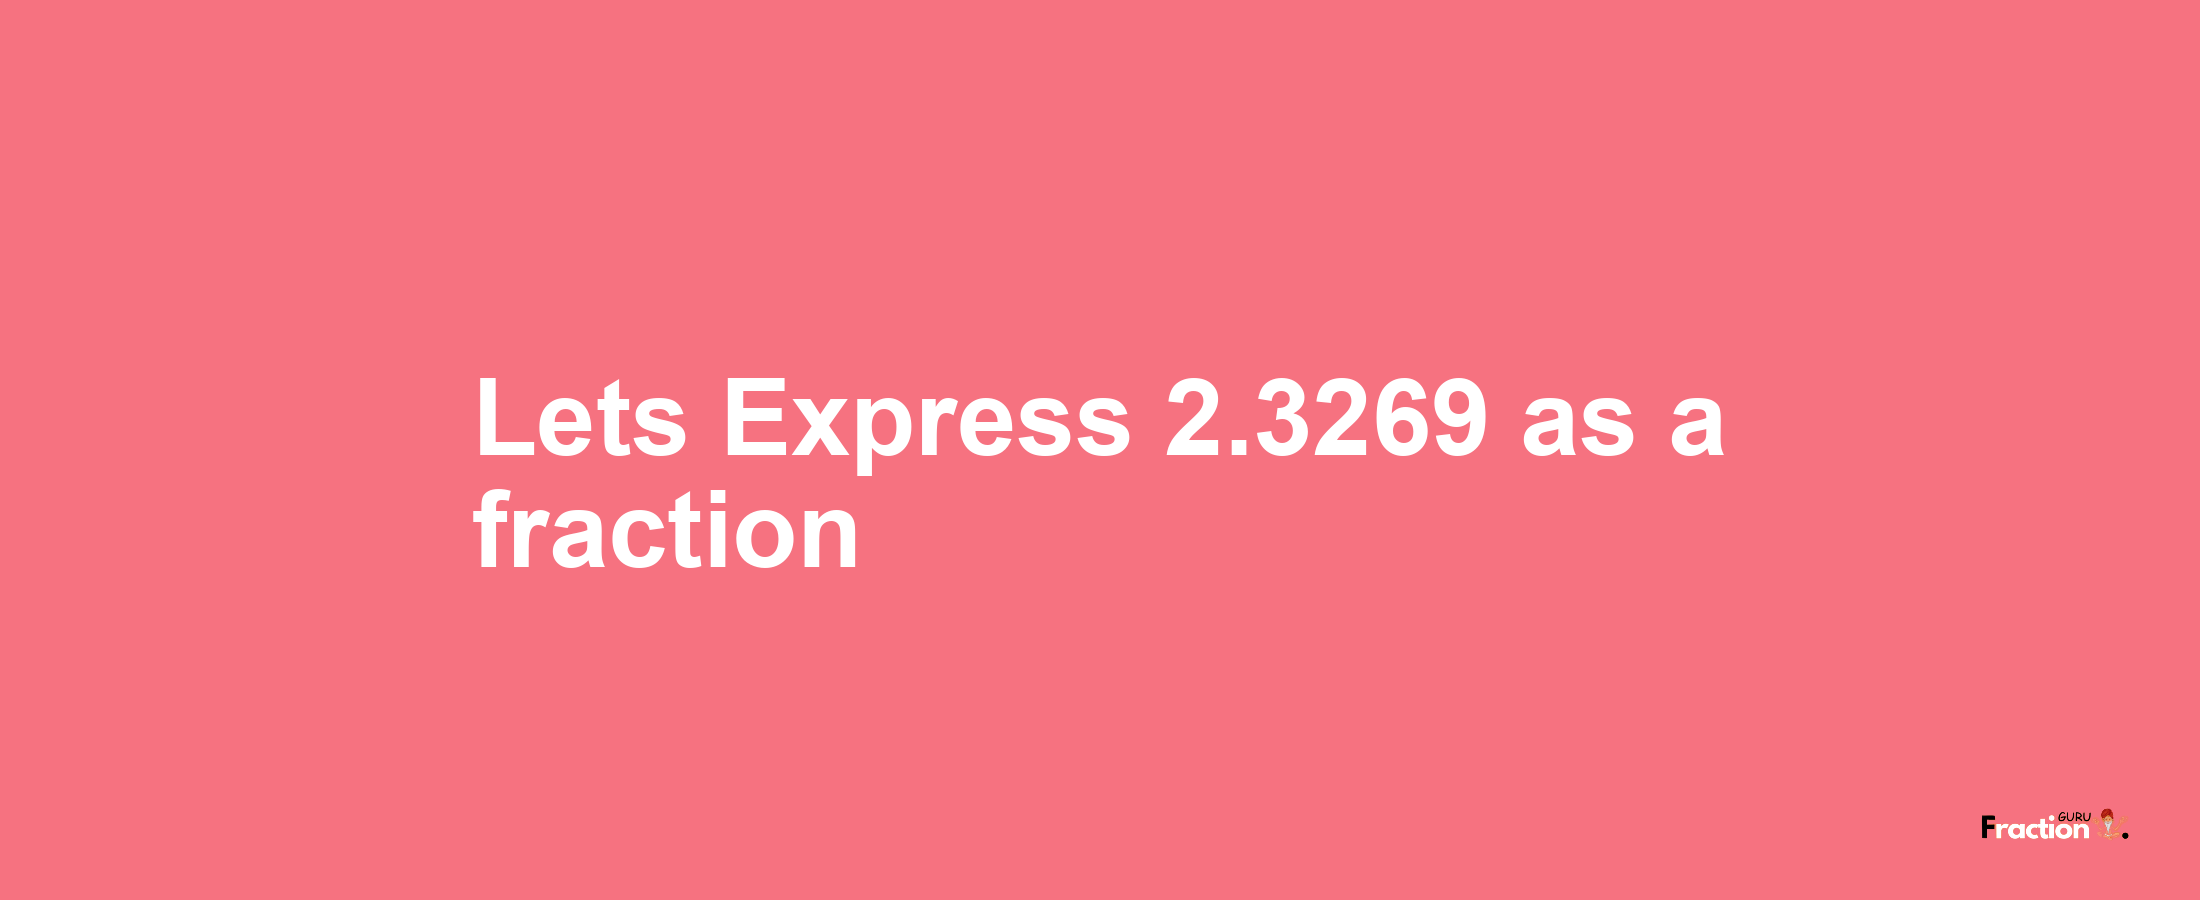 Lets Express 2.3269 as afraction